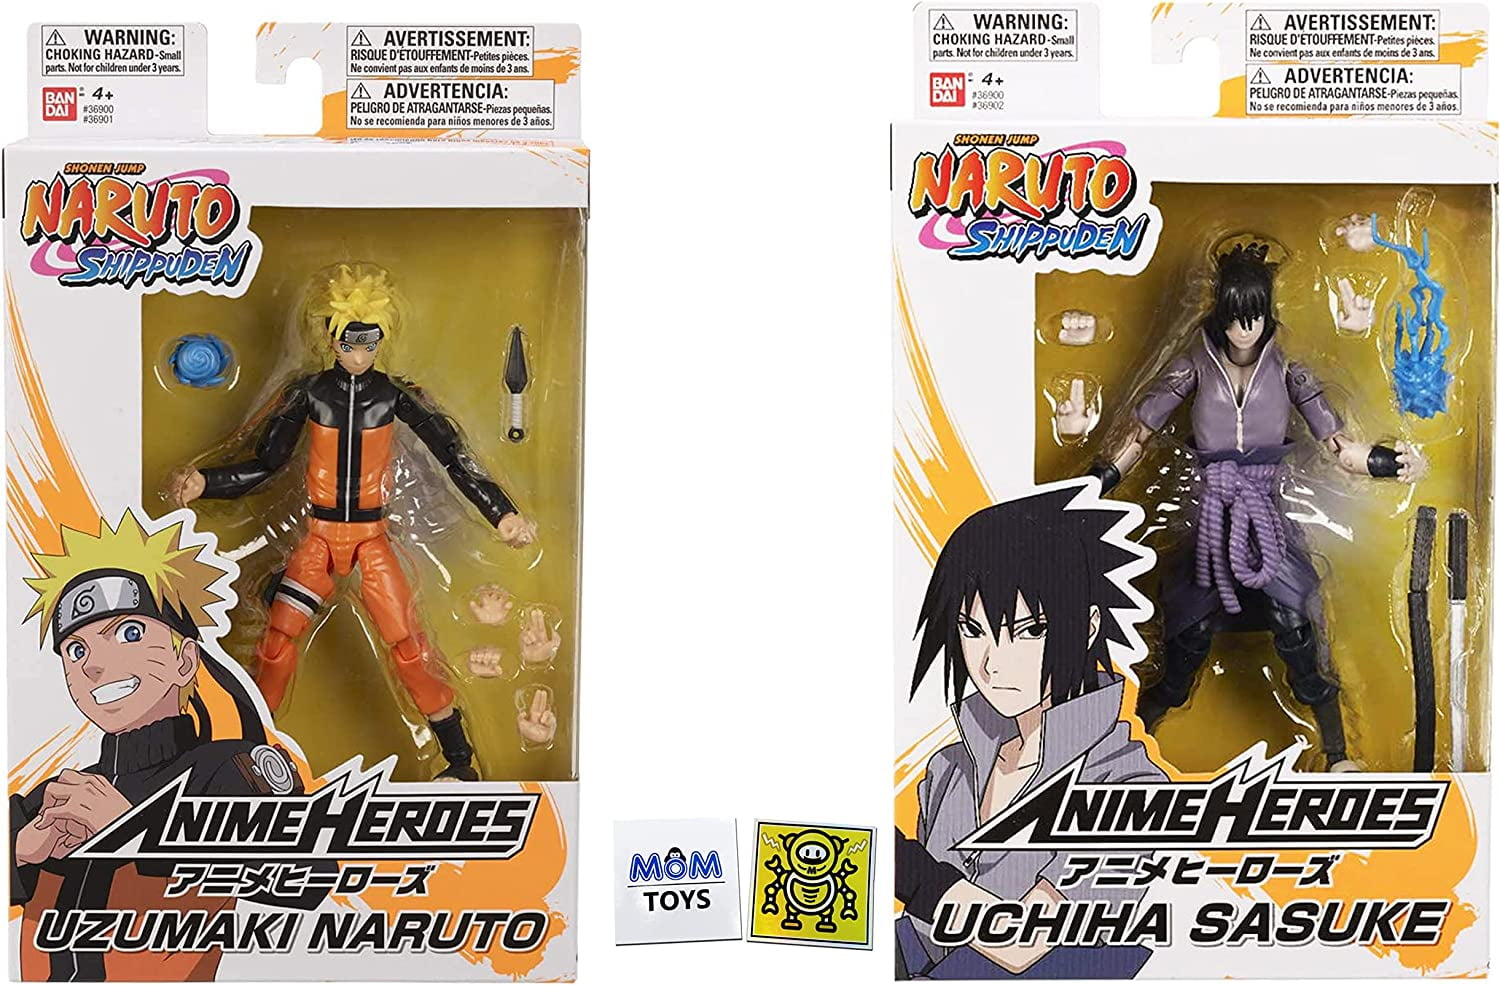 Bandai Anime Heroes Rivals 2 Pack Uzumaki Naruto and Sasuke Uchiha Toy  Action Figure Toy Bundle with 2 My Outlet Mall Stickers